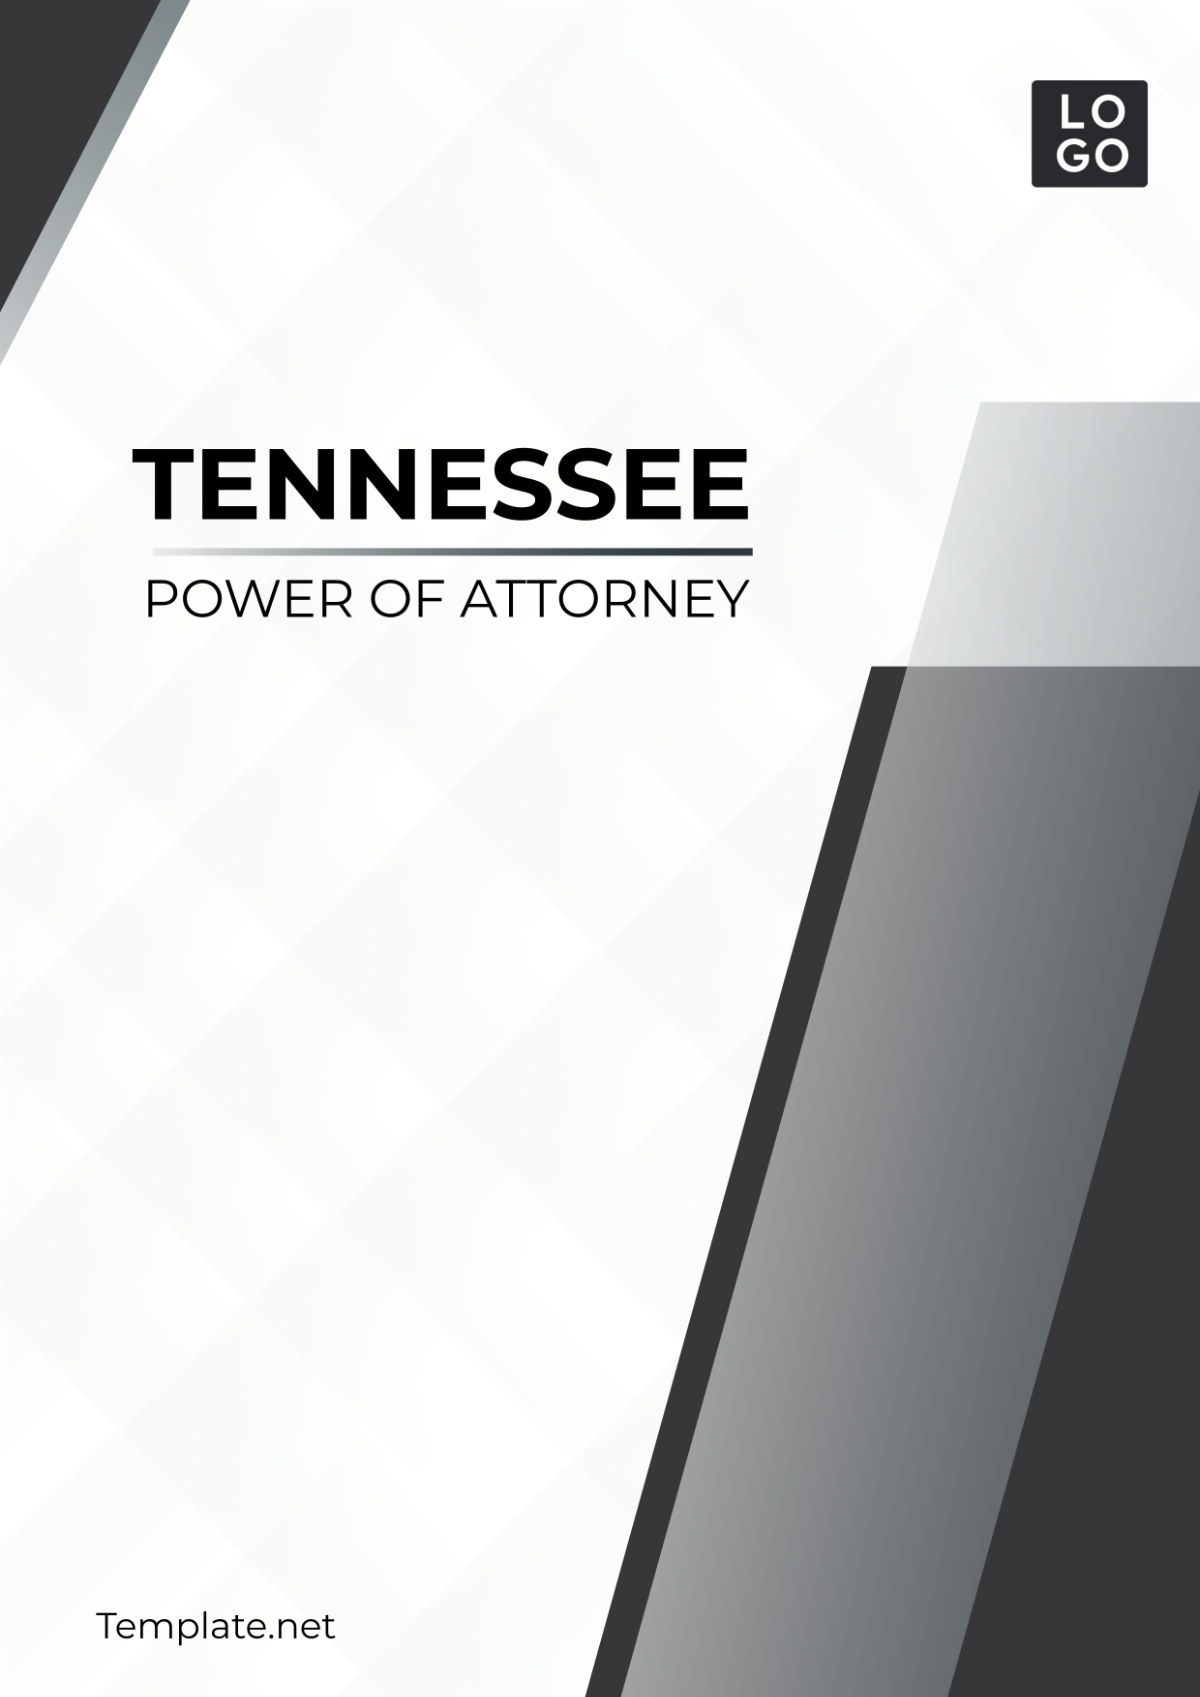 Tennessee Power of Attorney Cover Page